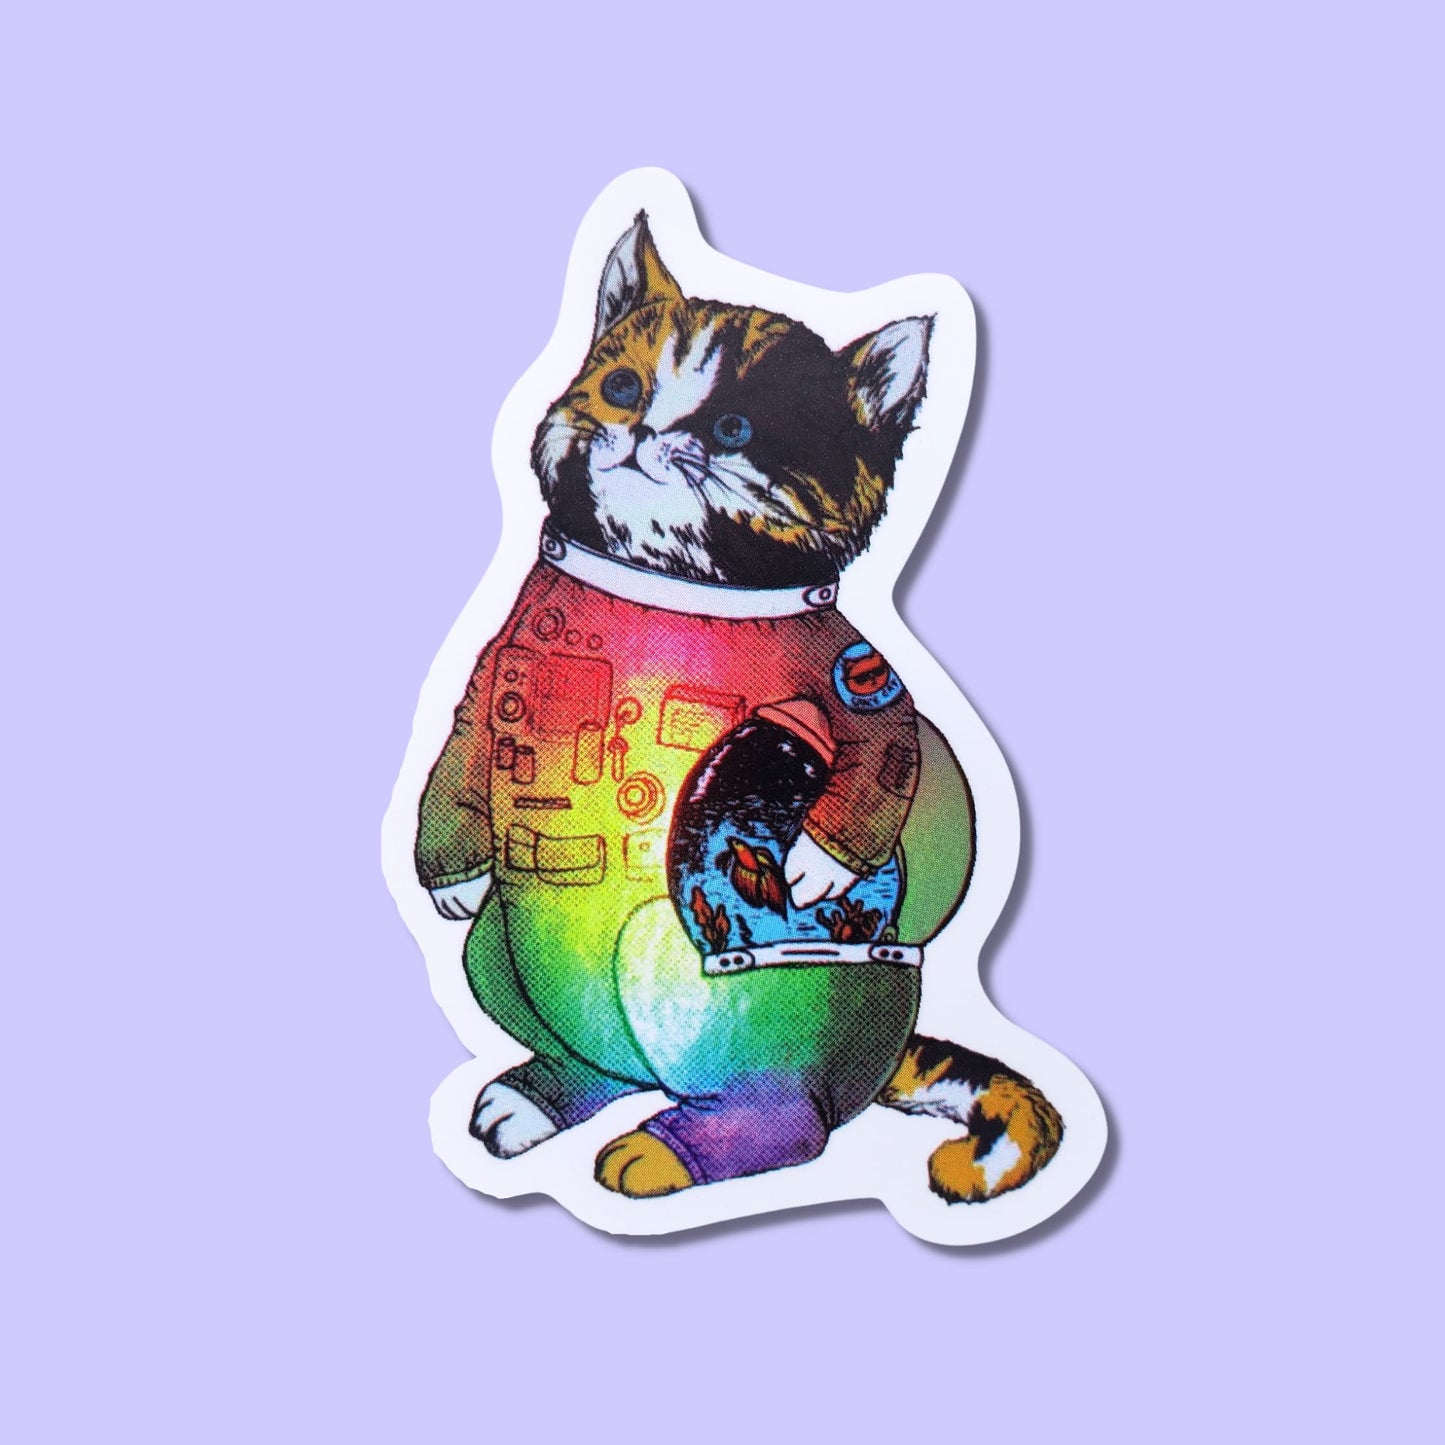 Calico Cat Astronaut Waterproof Sticker | Astro Cat from Confetti Kitty, Only 1.00